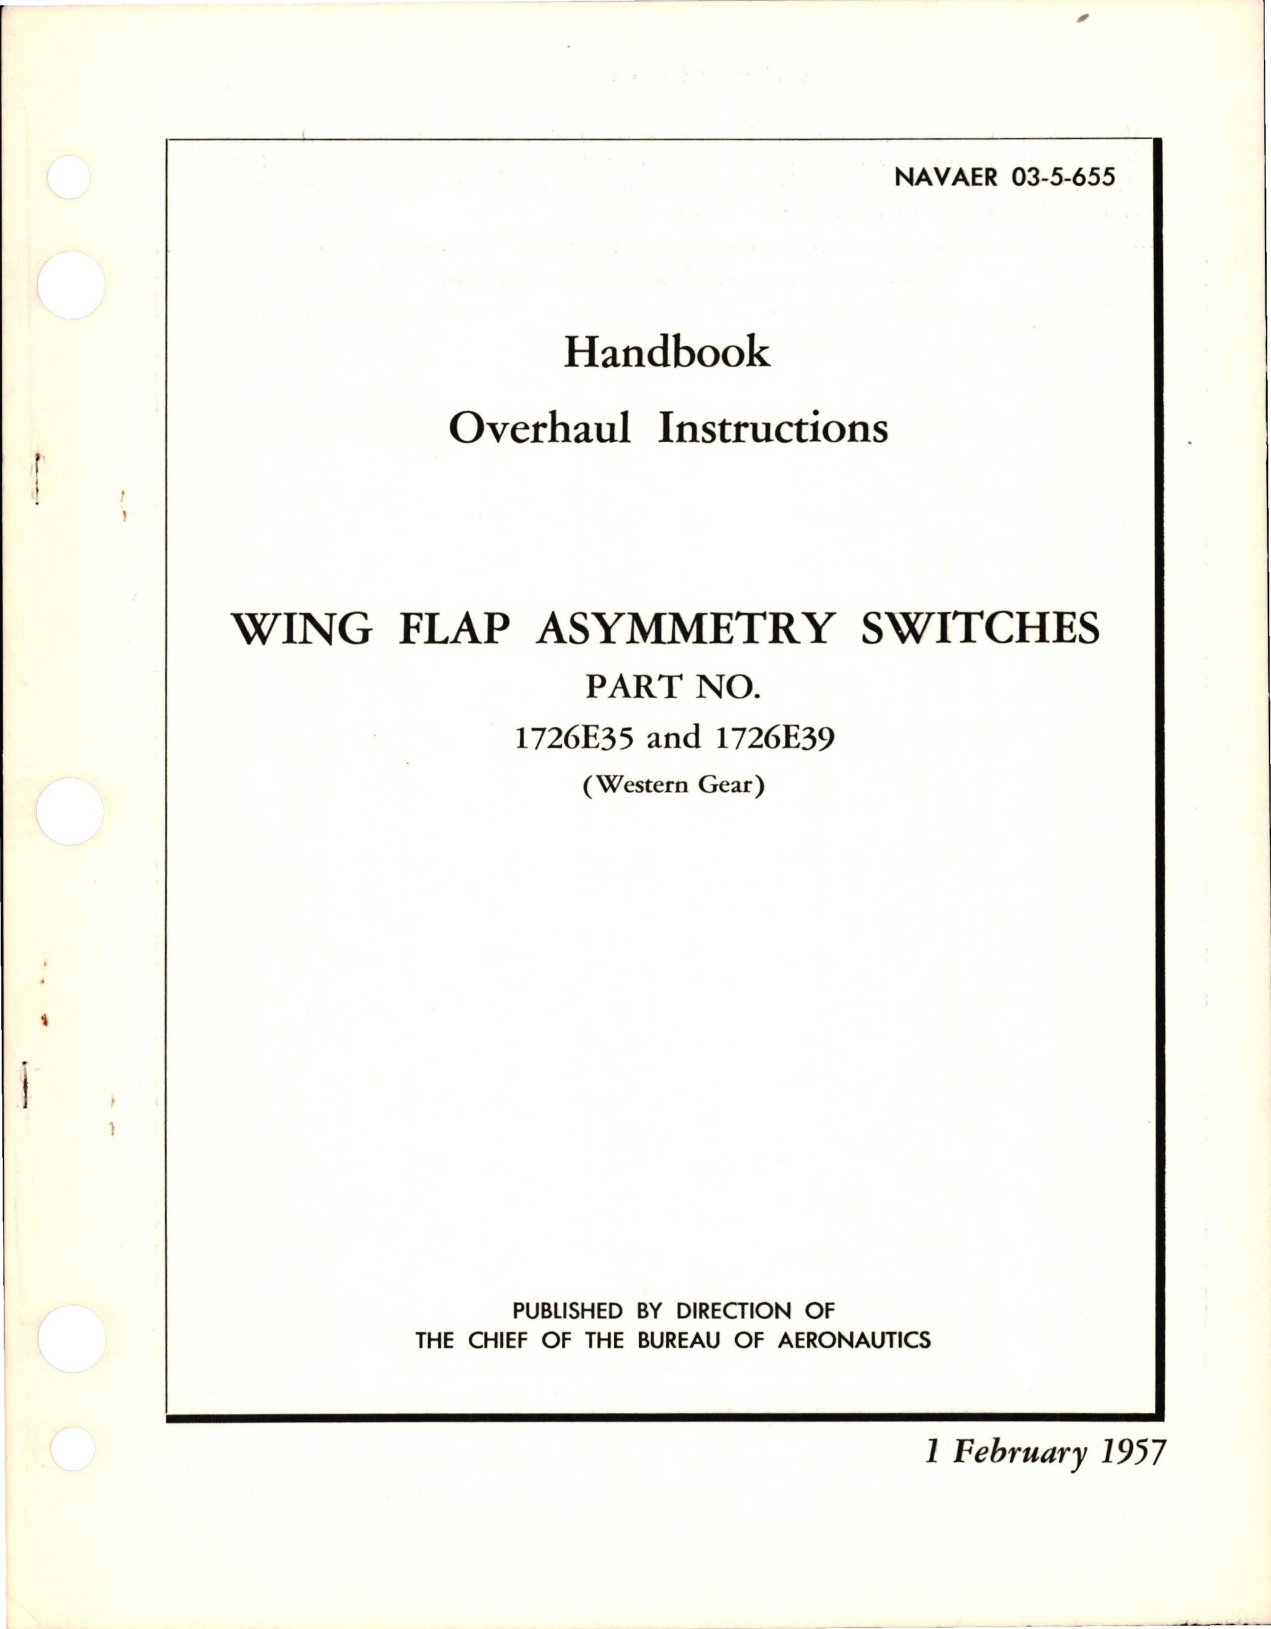 Sample page 1 from AirCorps Library document: Overhaul Instructions for Wing Flap Asymmetry Switches - Part 1726E35 and 1726E39 